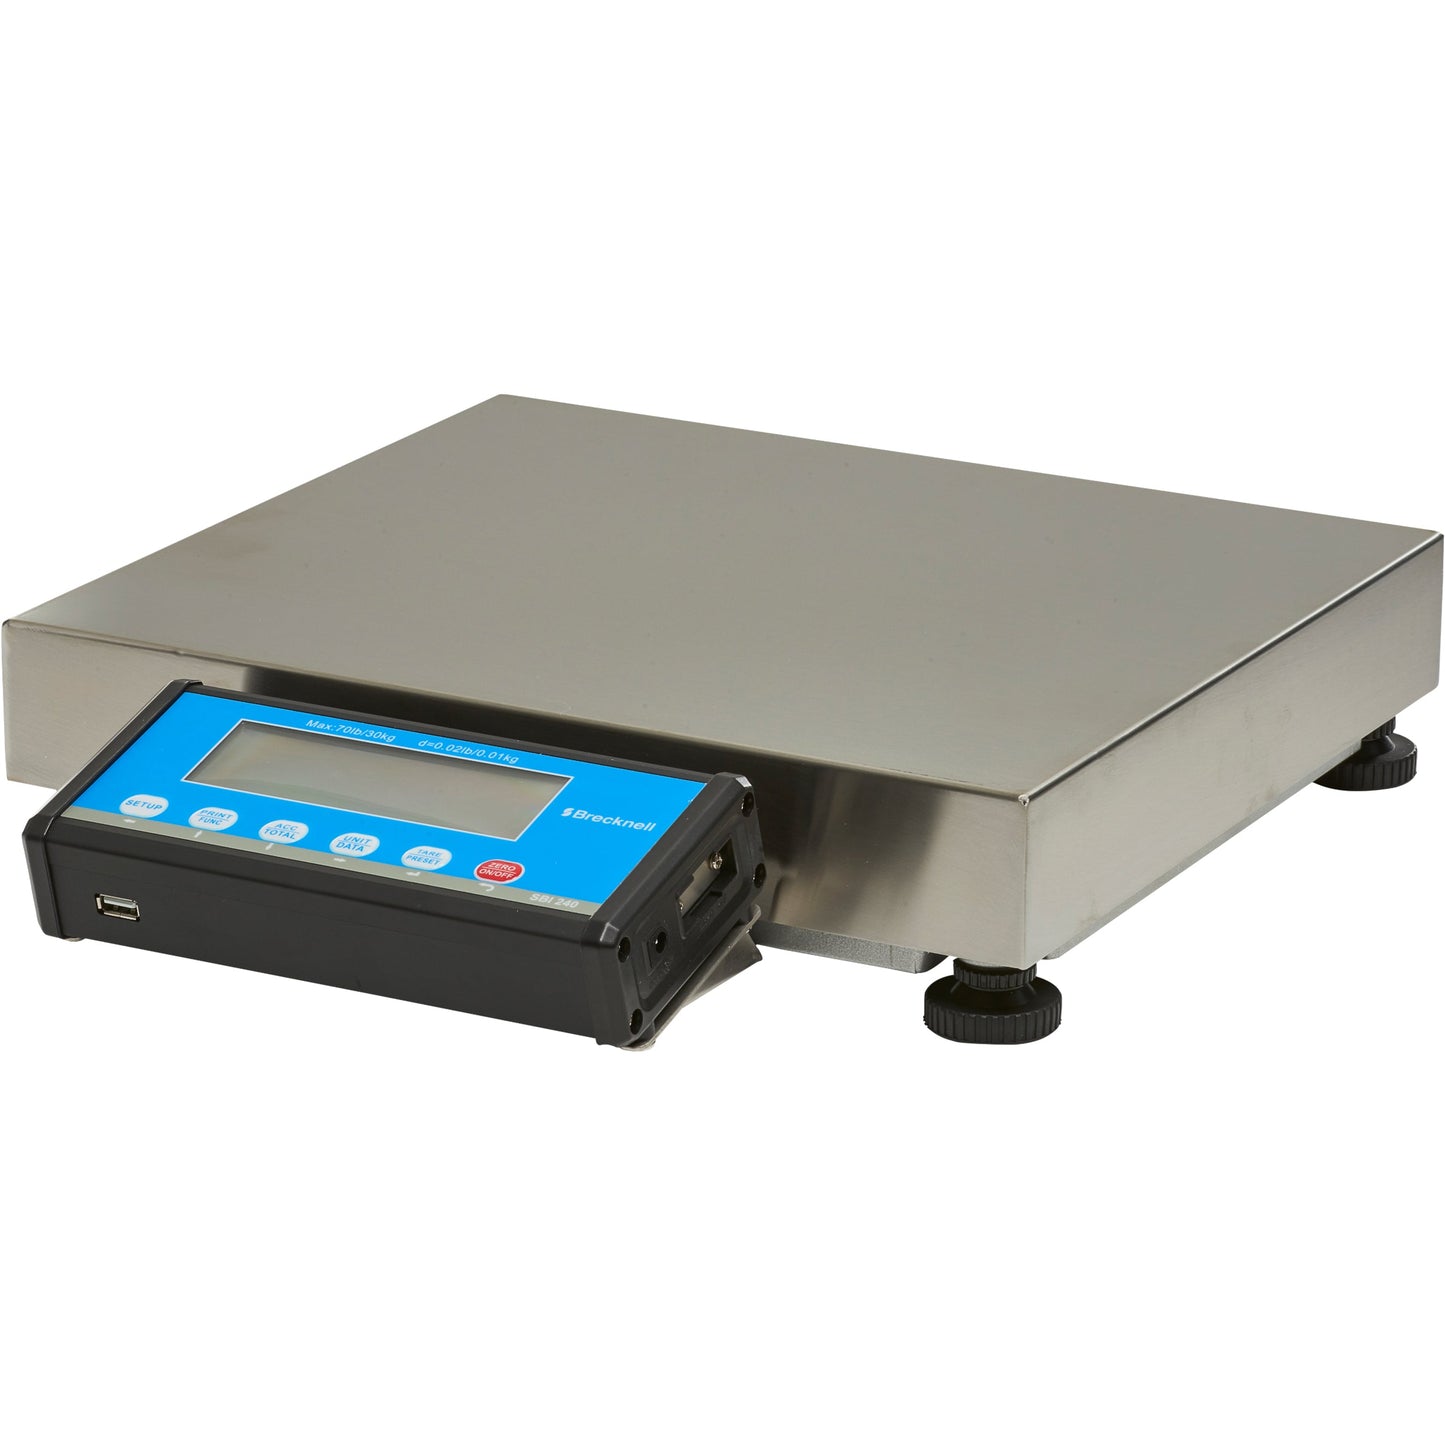 Brecknell PS-USB Portable Shipping Scale 150LB Capacity Emulation Protocols LCD Screen Aluminum and Steel Construction